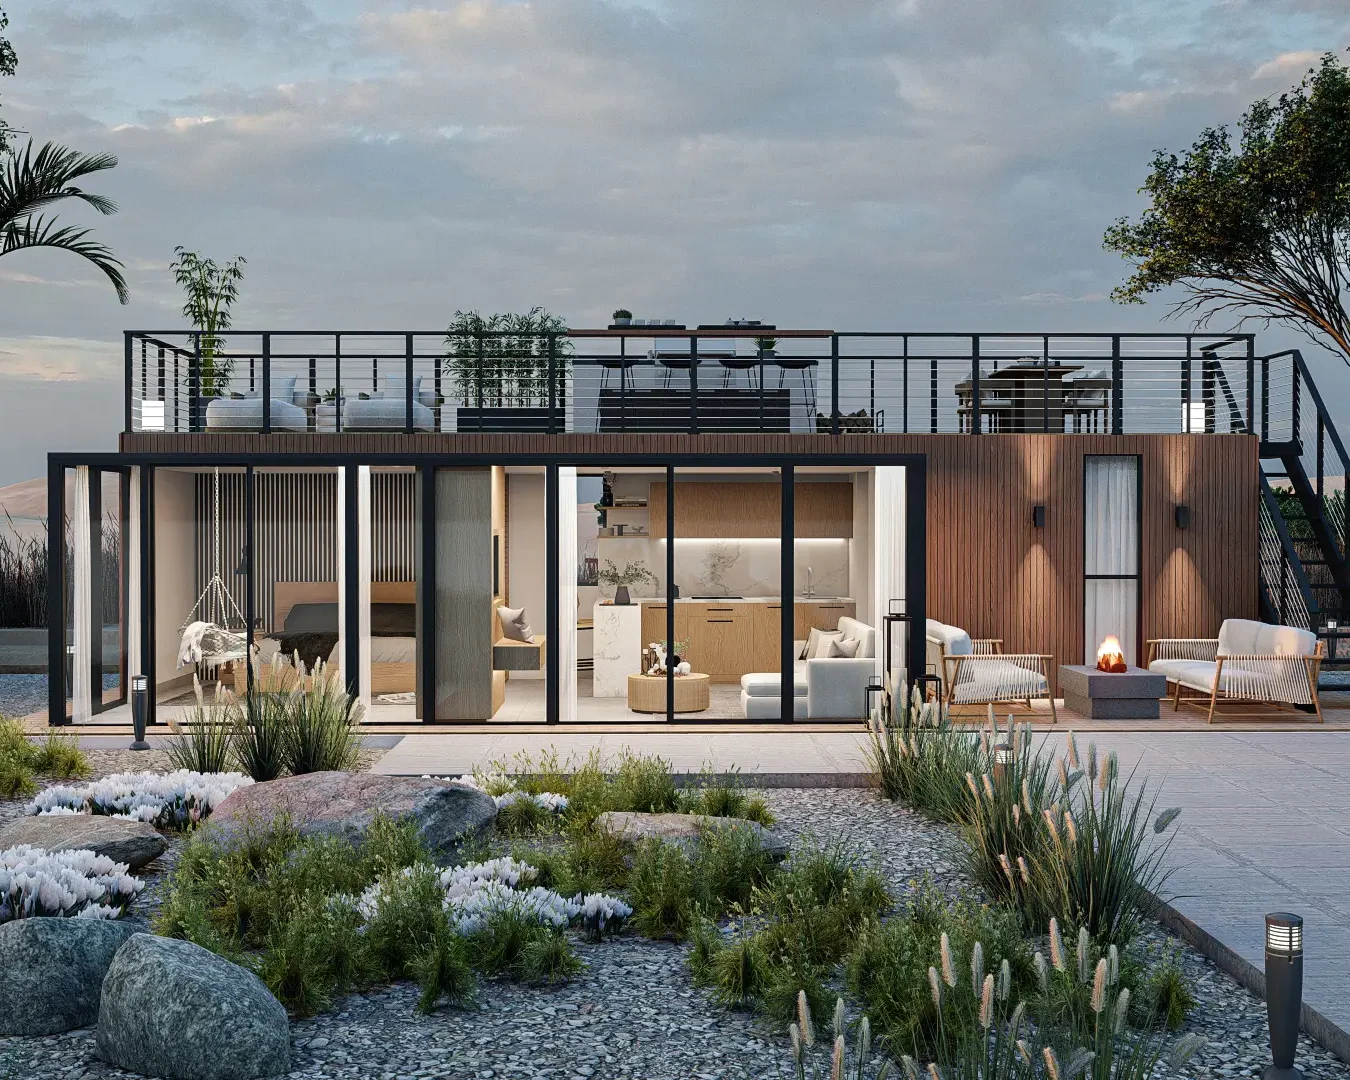 A modern container home with a spacious rooftop terrace, large windows, and contemporary design elements. The exterior is beautifully landscaped with a variety of plants and rocks, creating an inviting outdoor space. Design by Debora, an online interior design service.